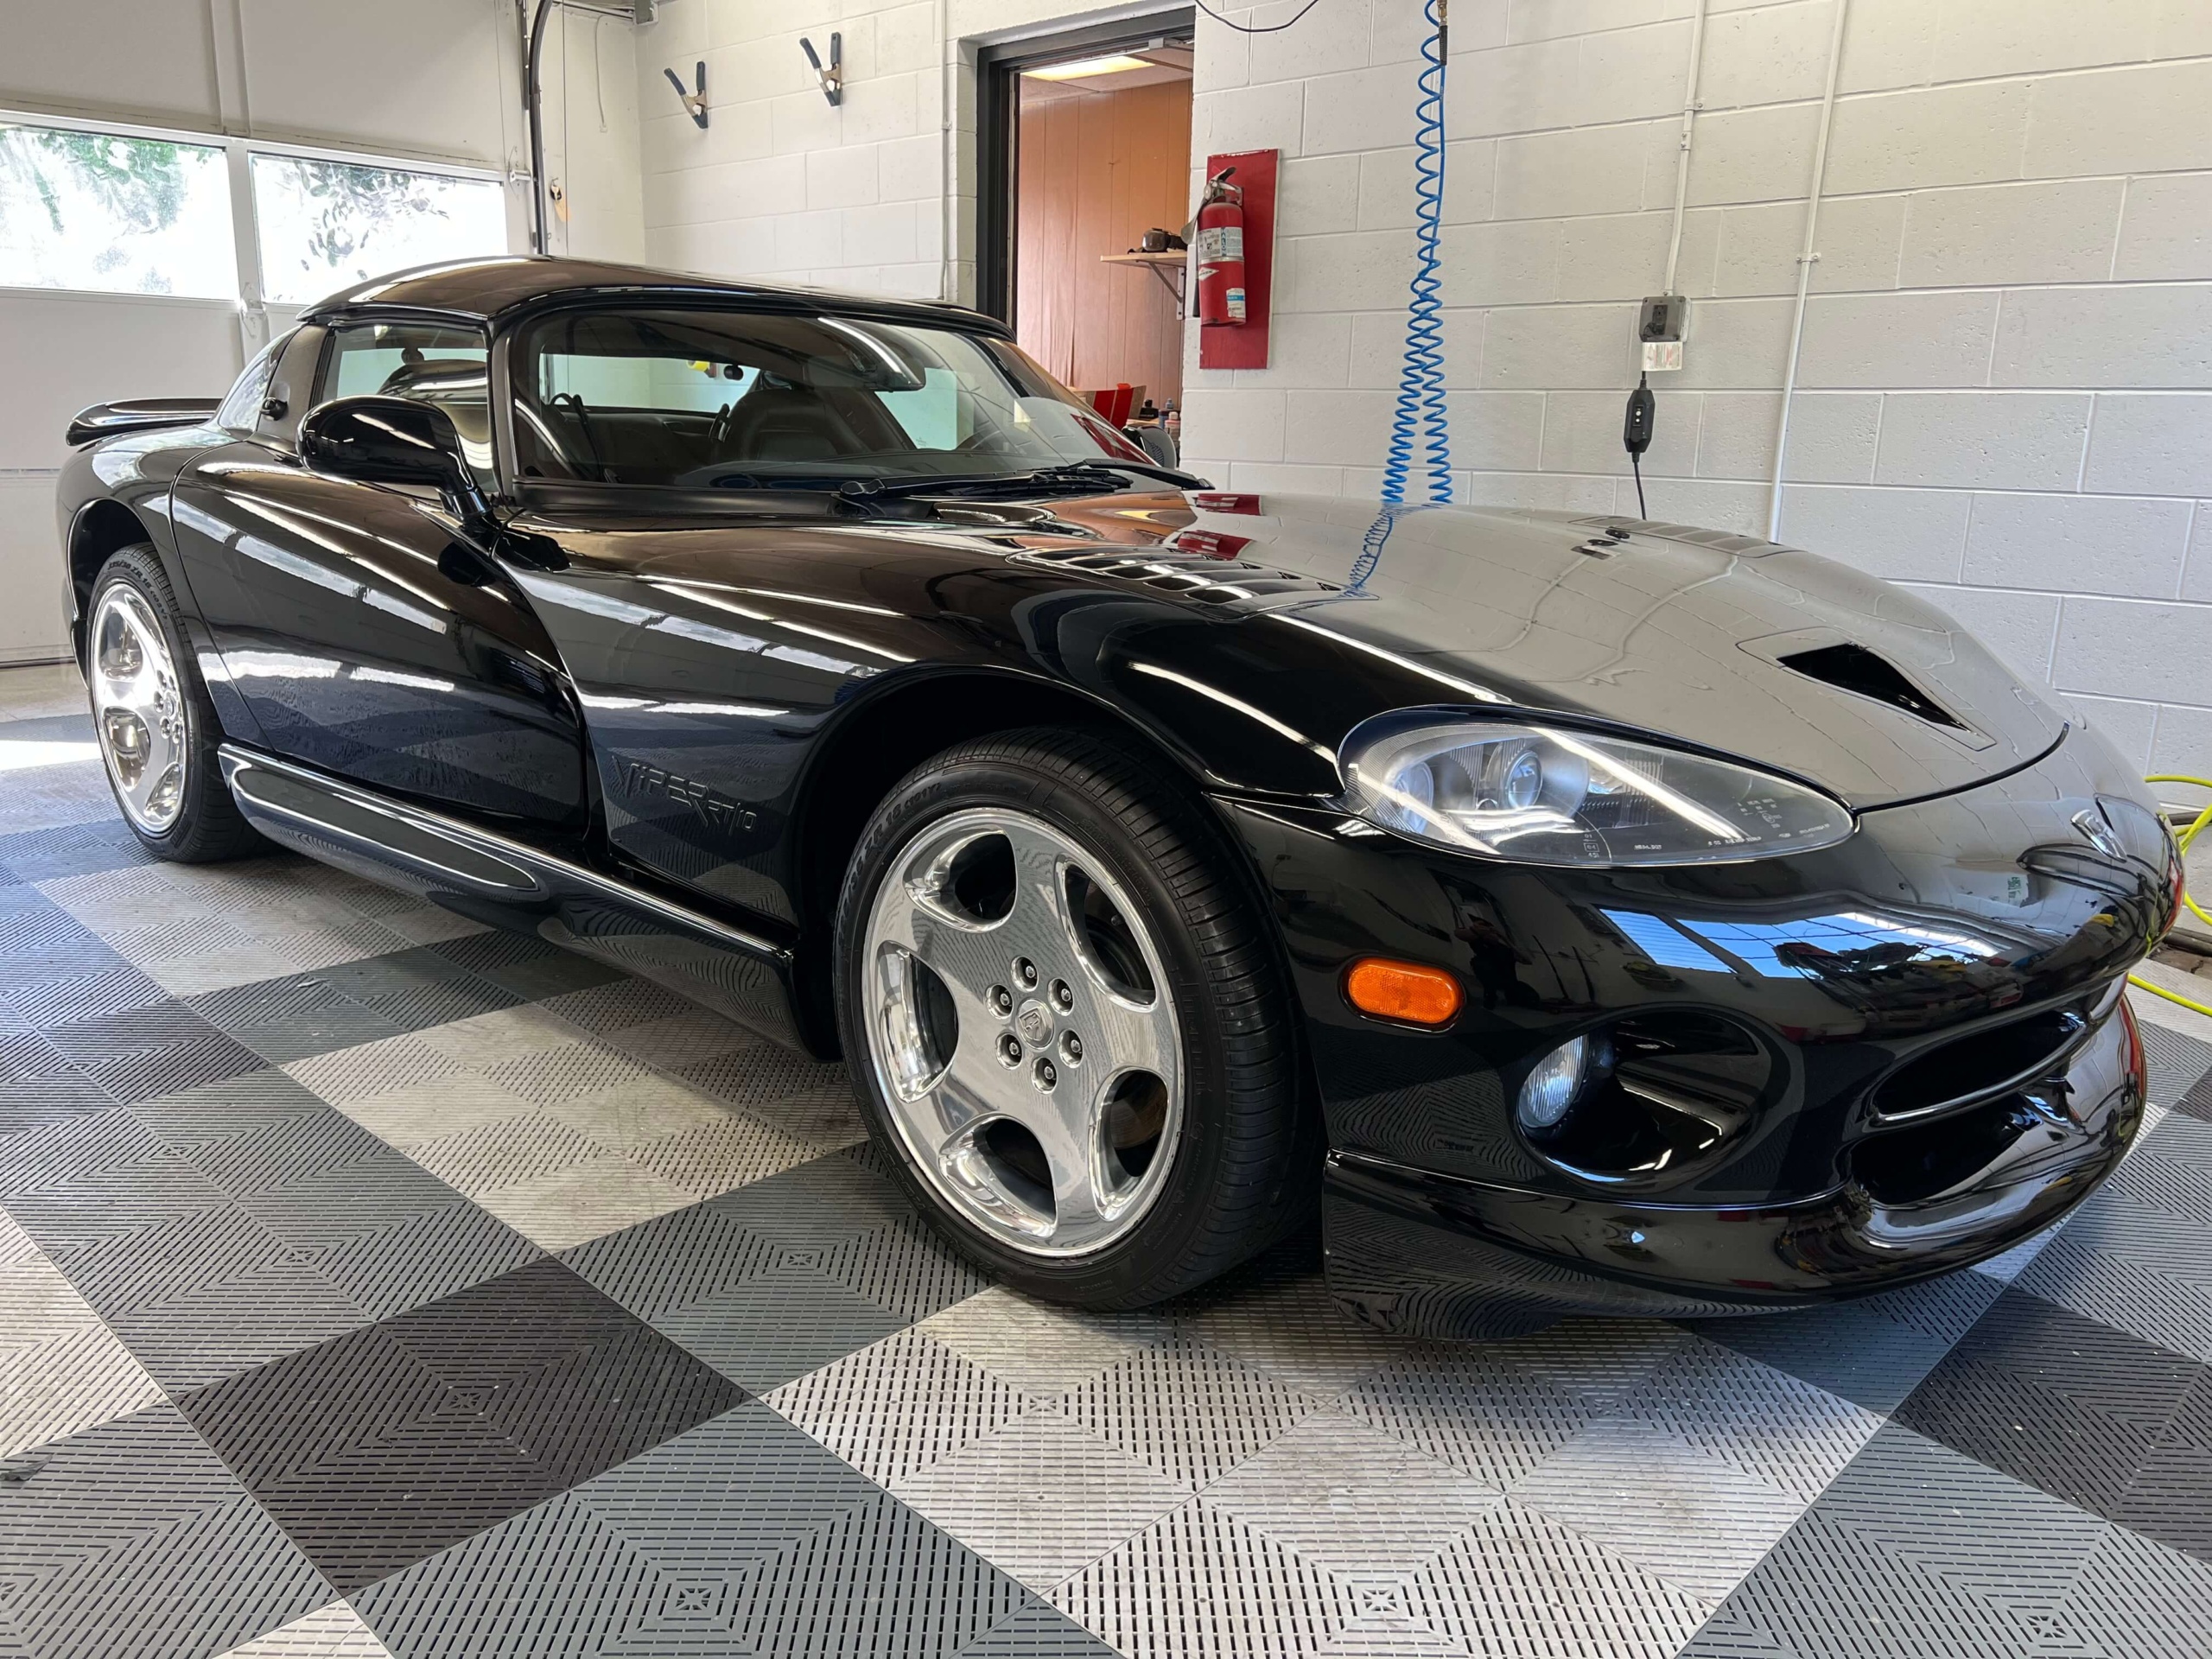 viper detailed